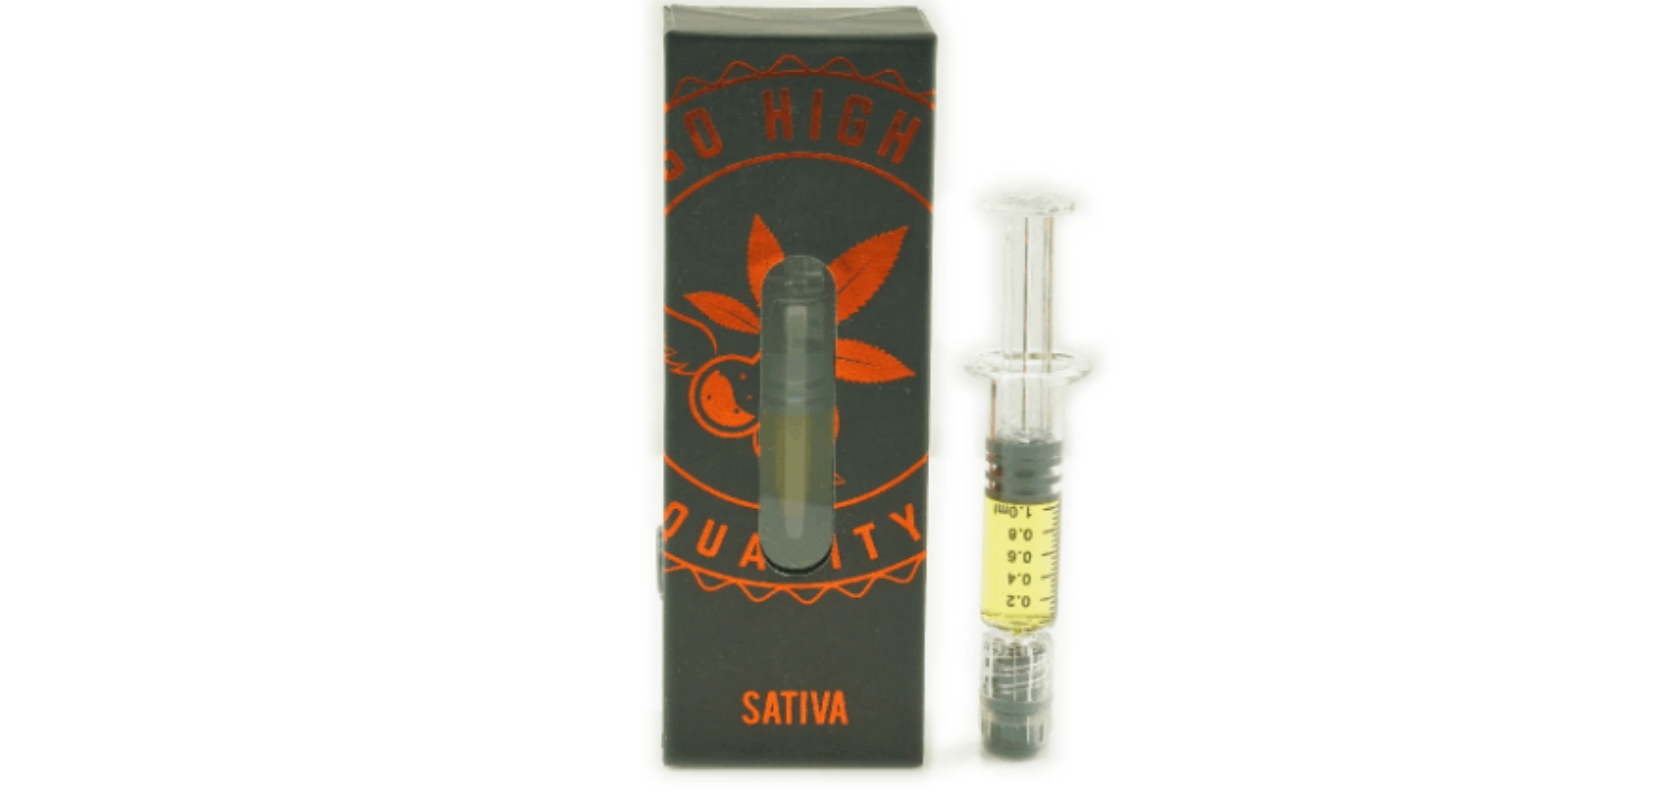 Sativa fans who are craving a different experience need to try the So High Premium Syringes - Jack Herer (Sativa). 